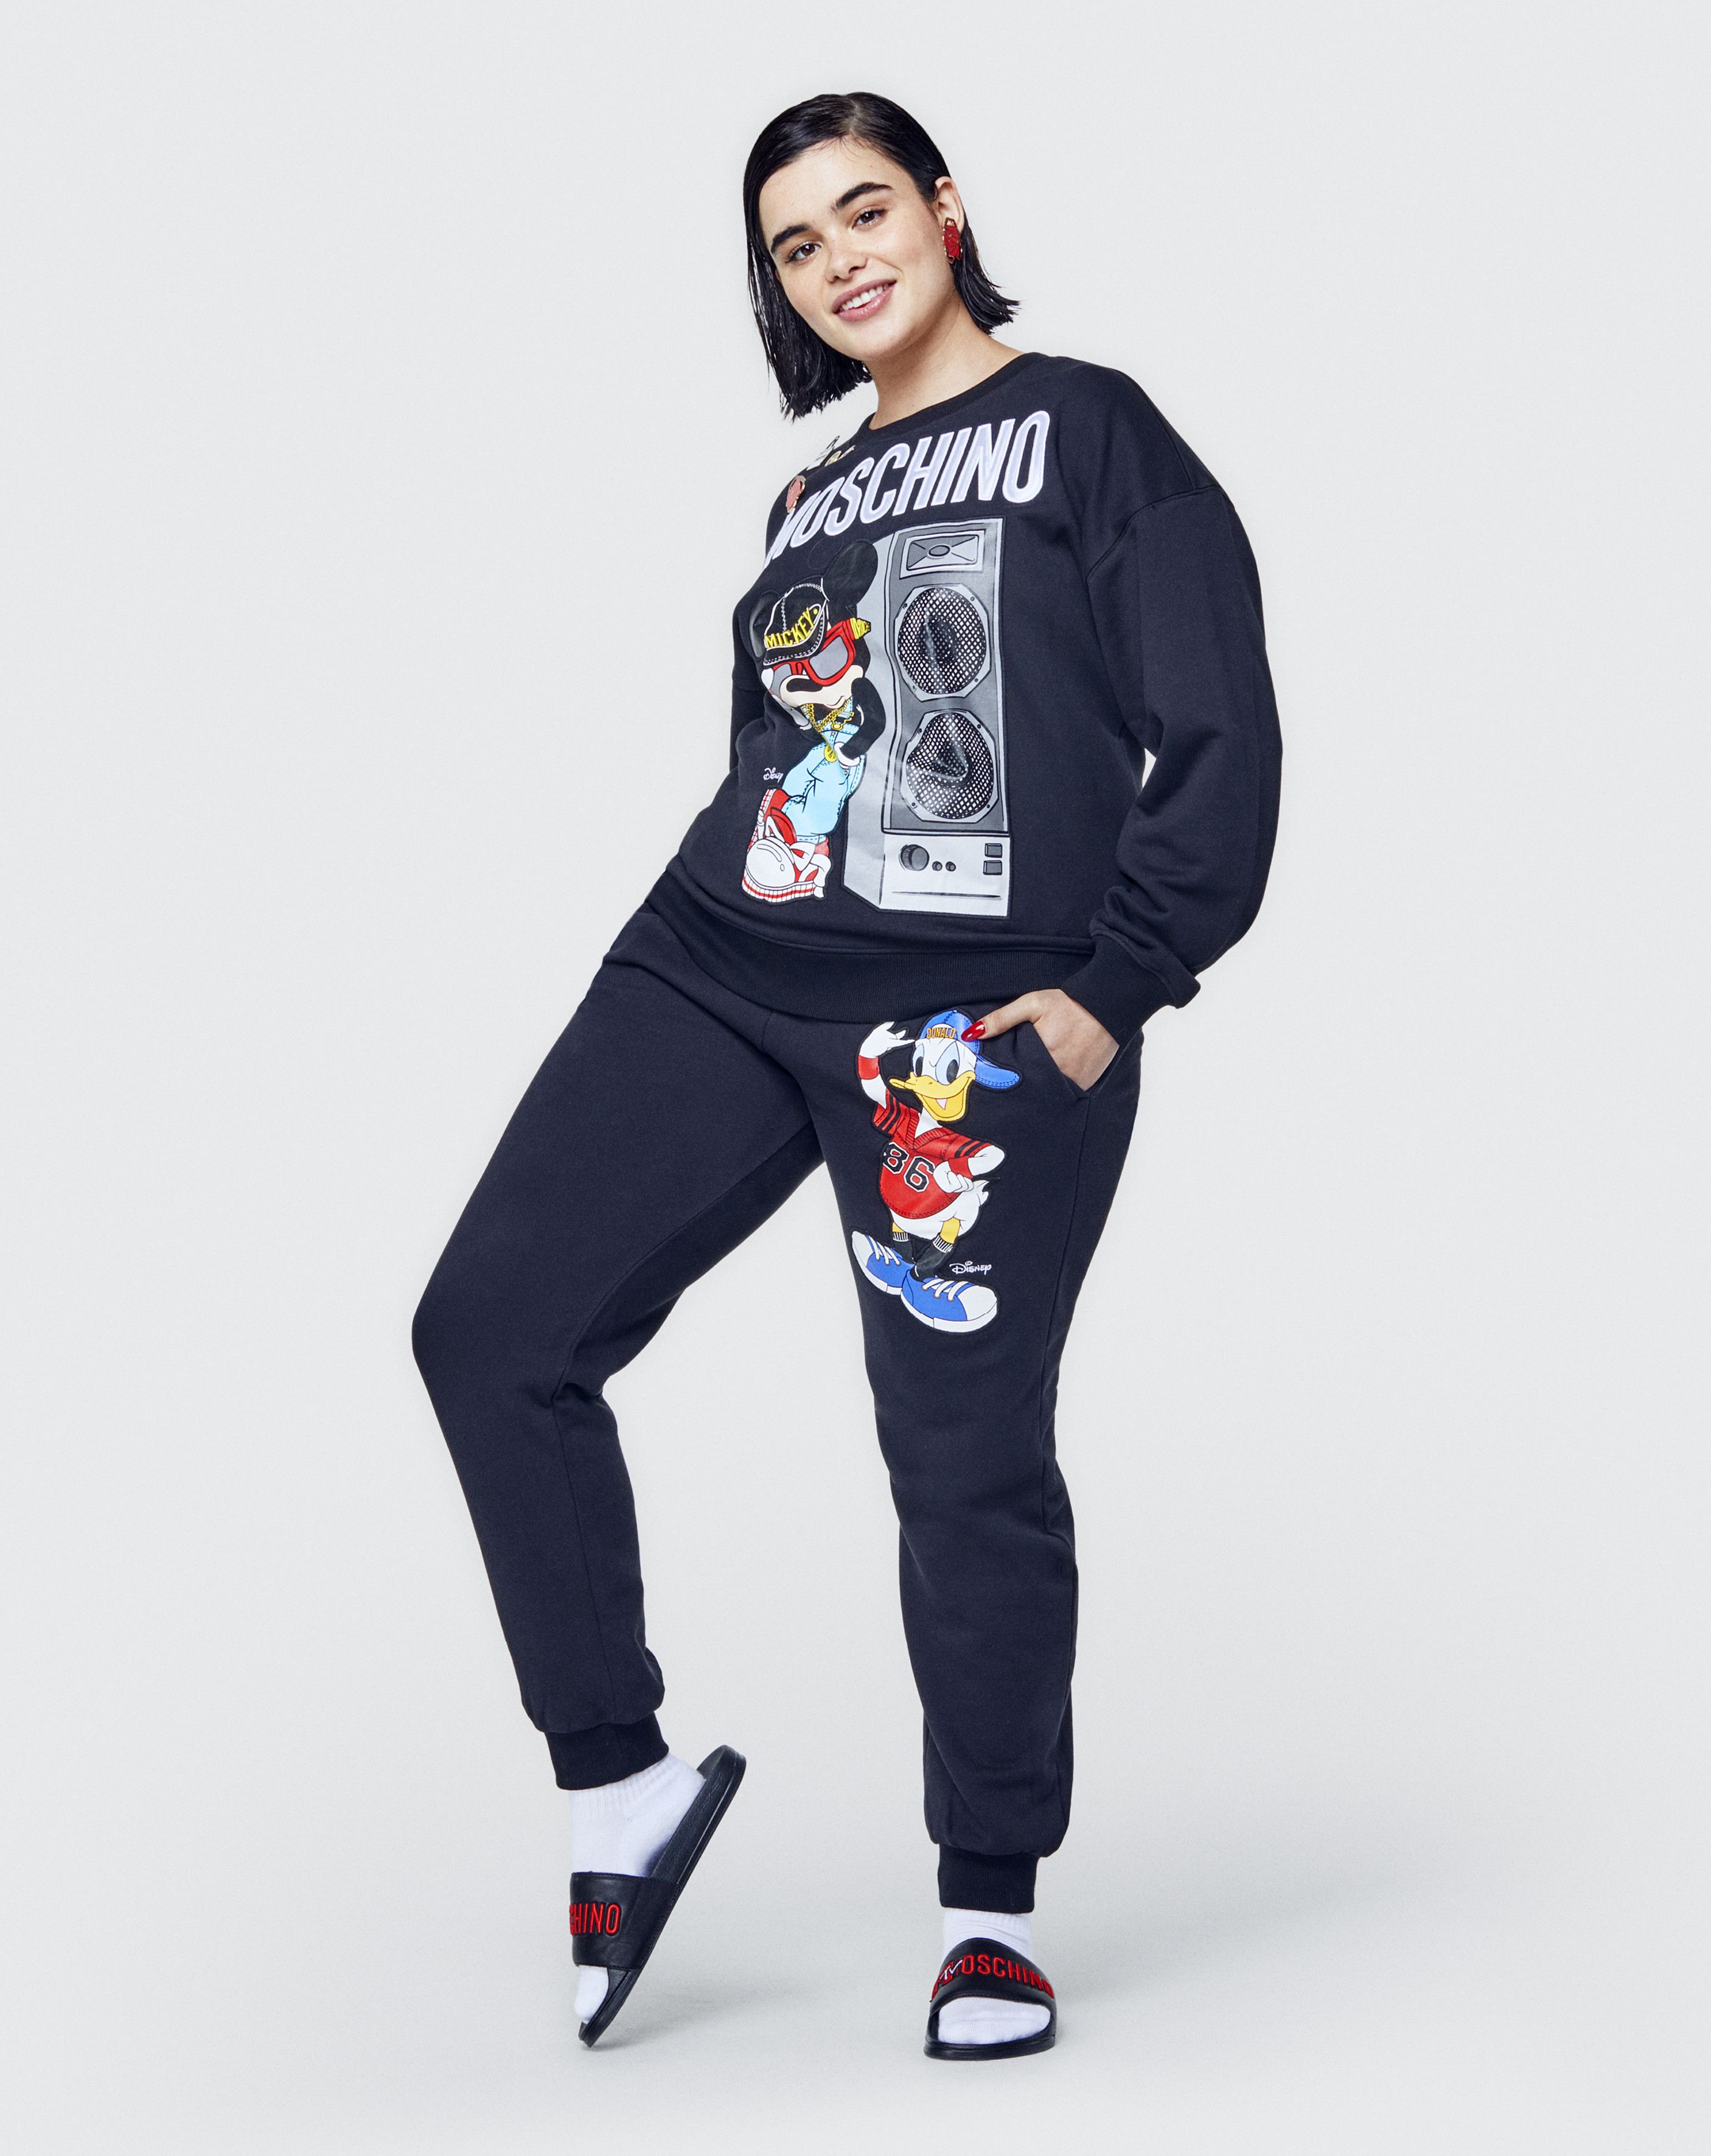 moschino mickey mouse h&m